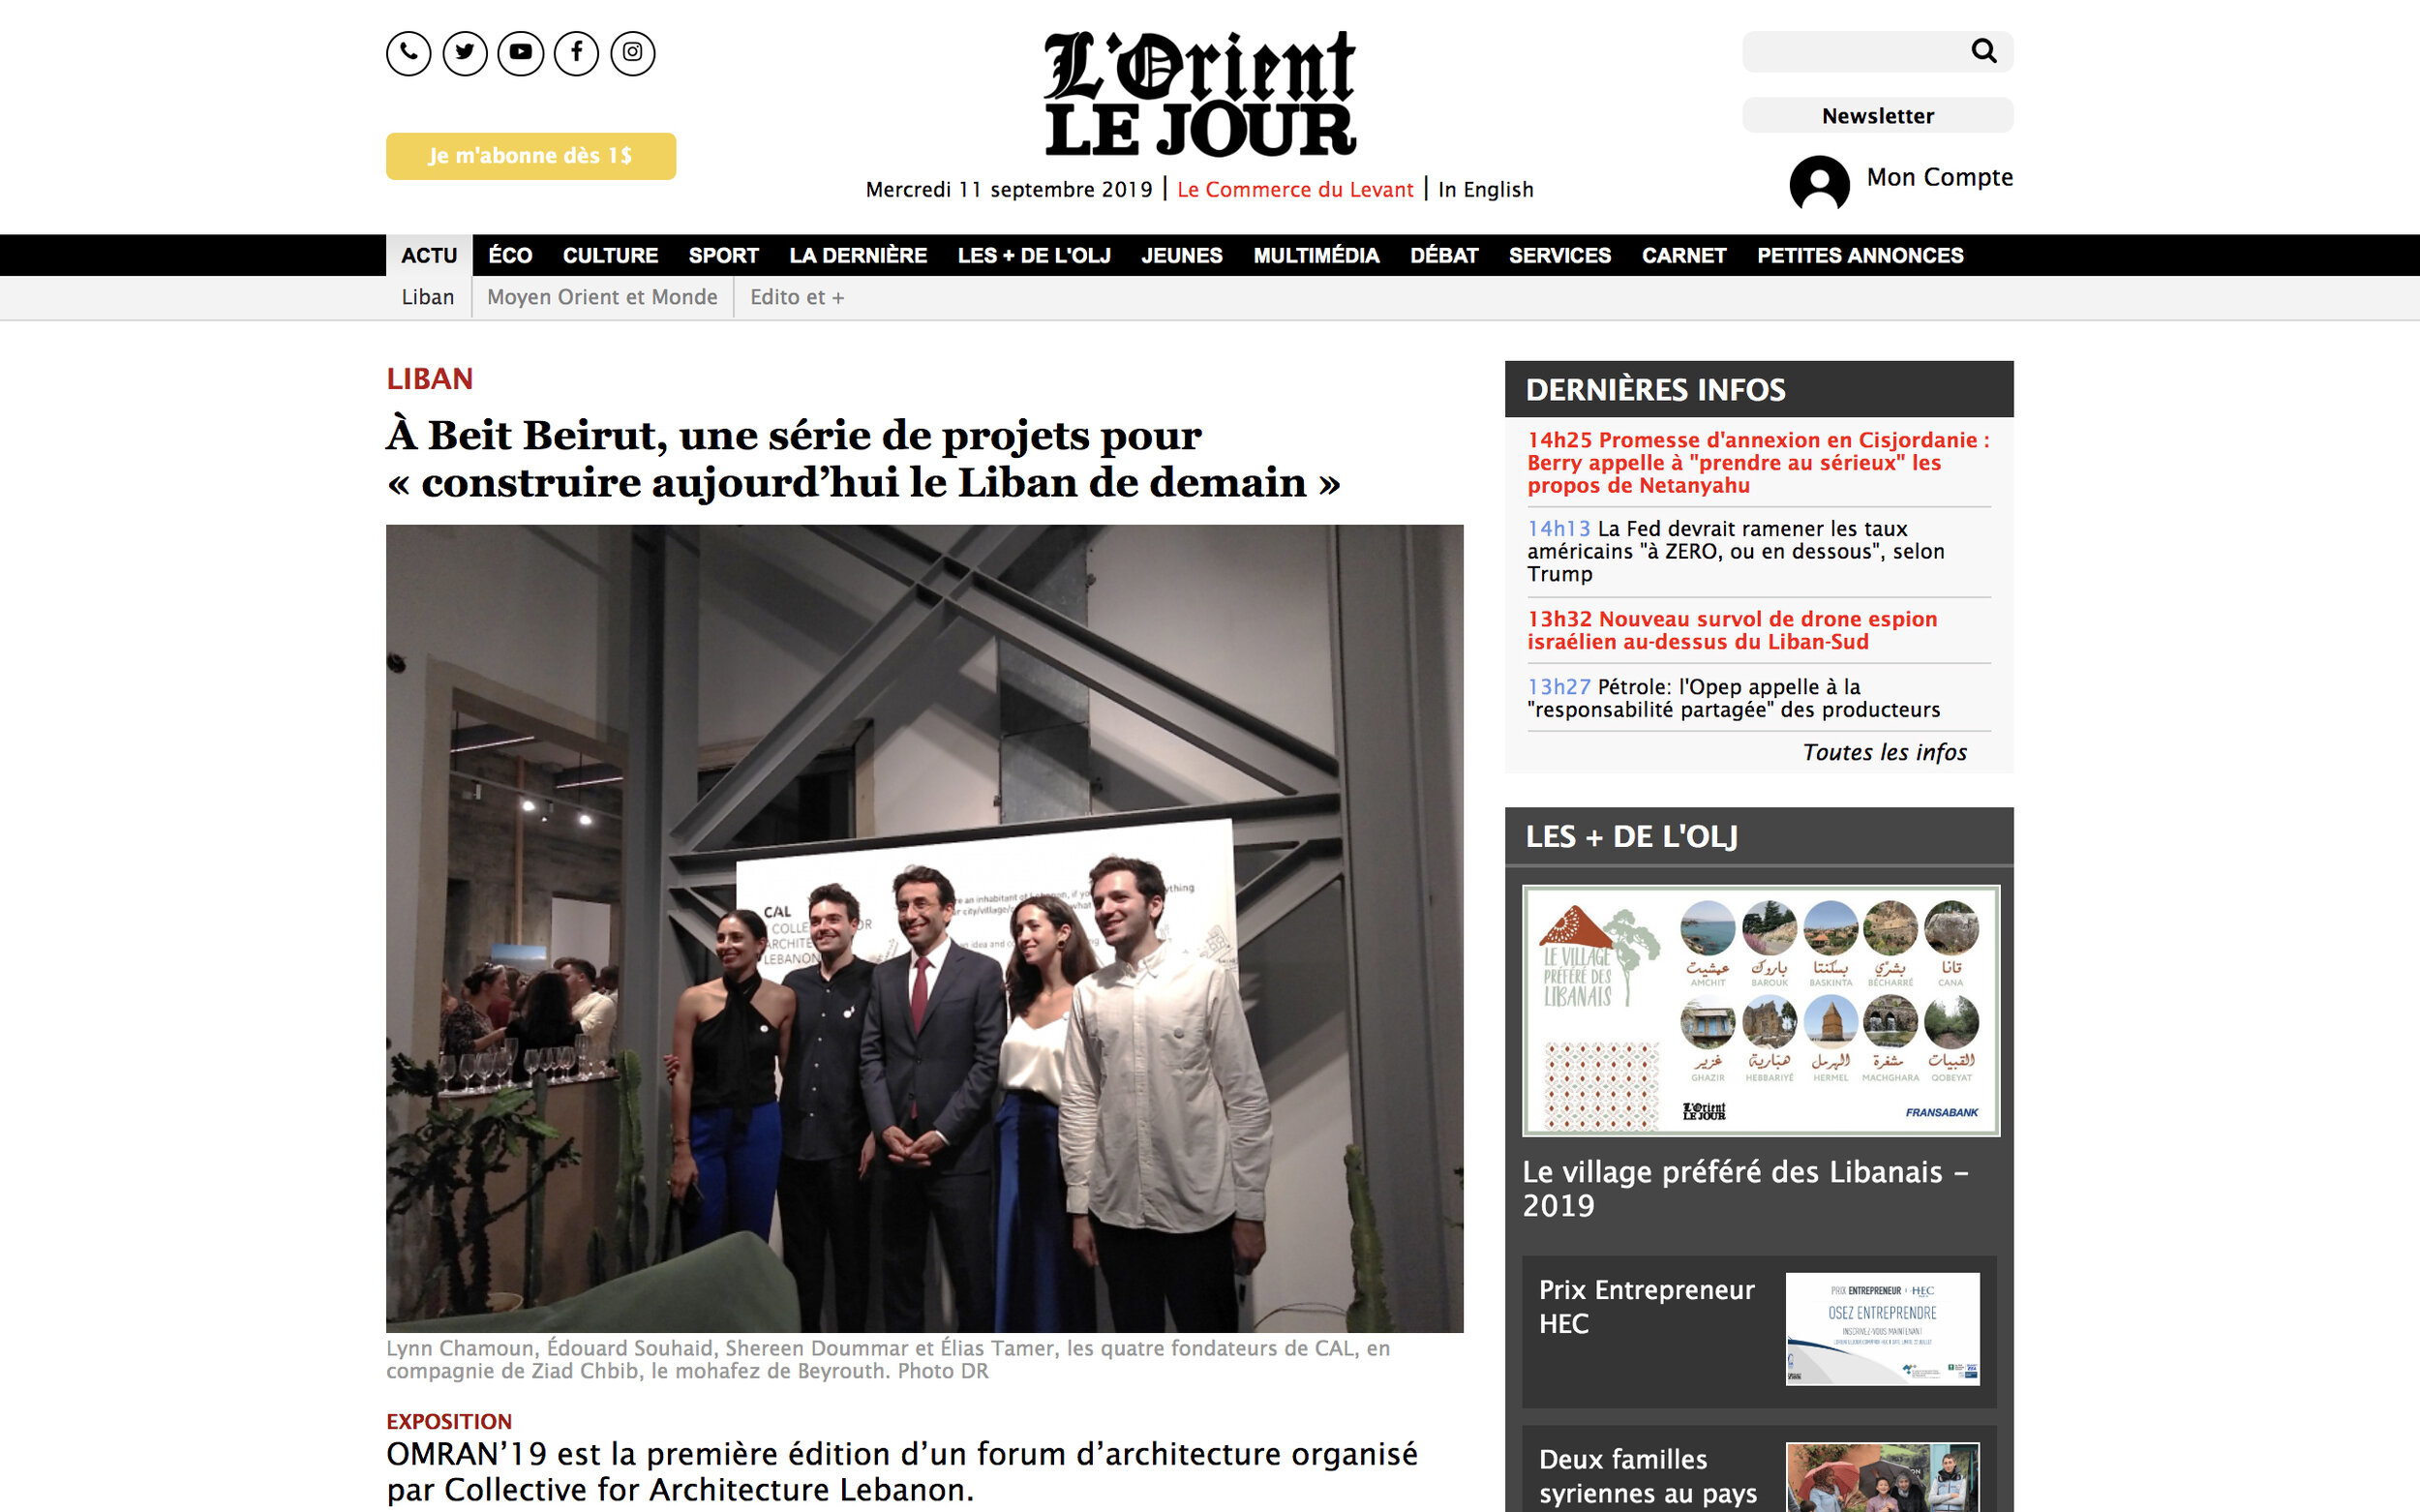 L’Orient Le Jour - Article about CAL and OMRAN